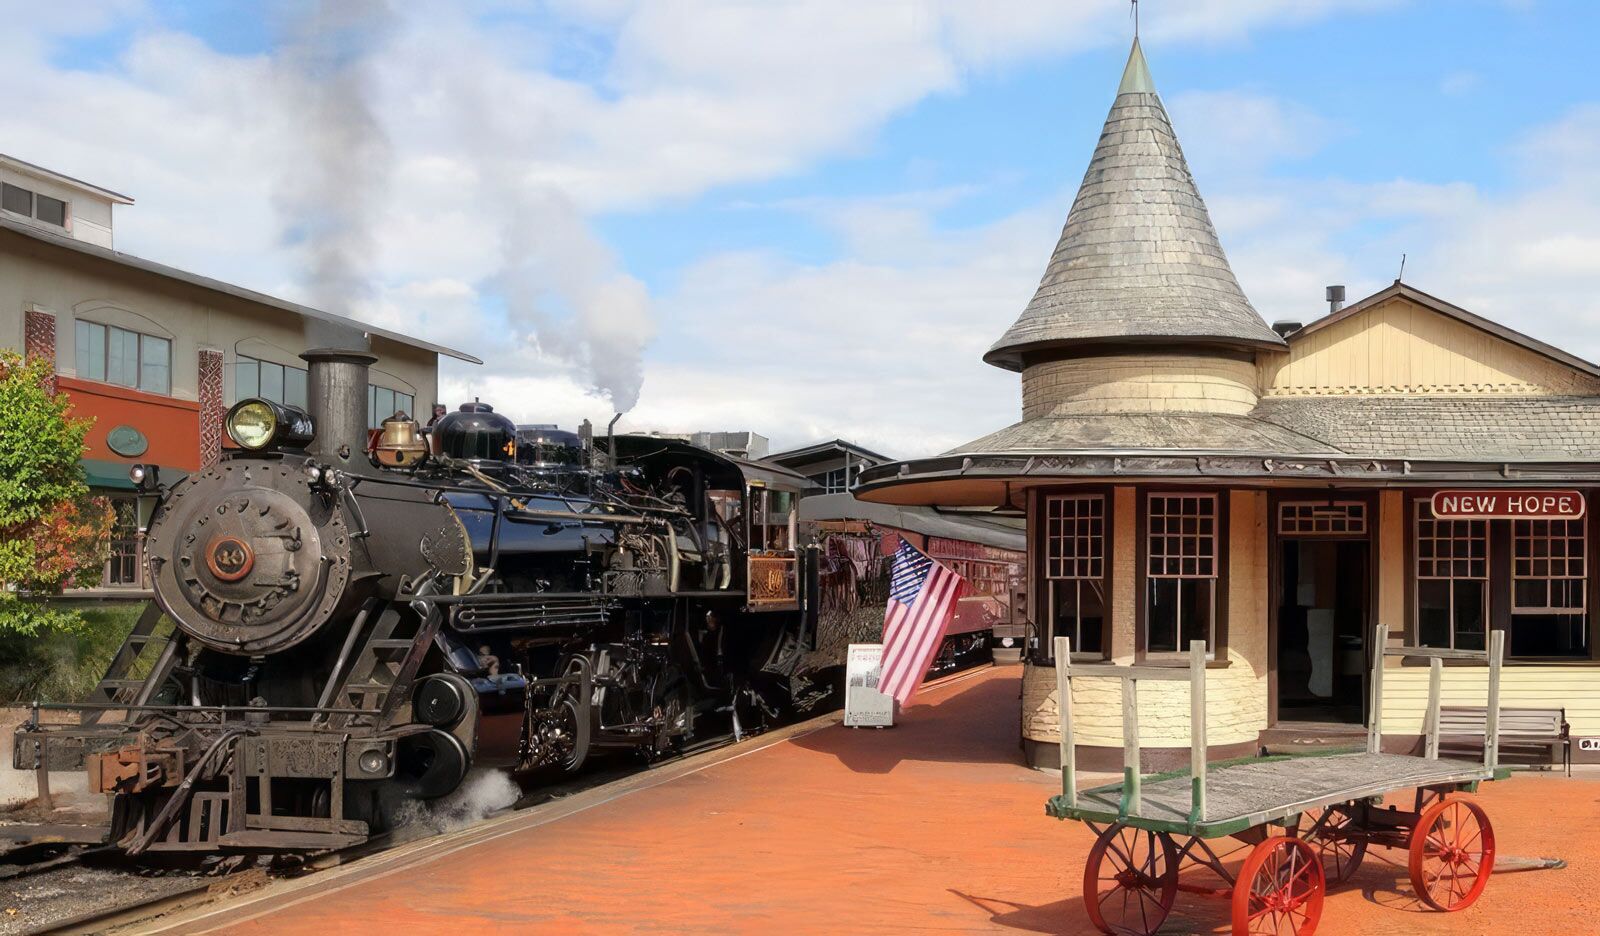 Day trips to New Hope Railroad from NYC